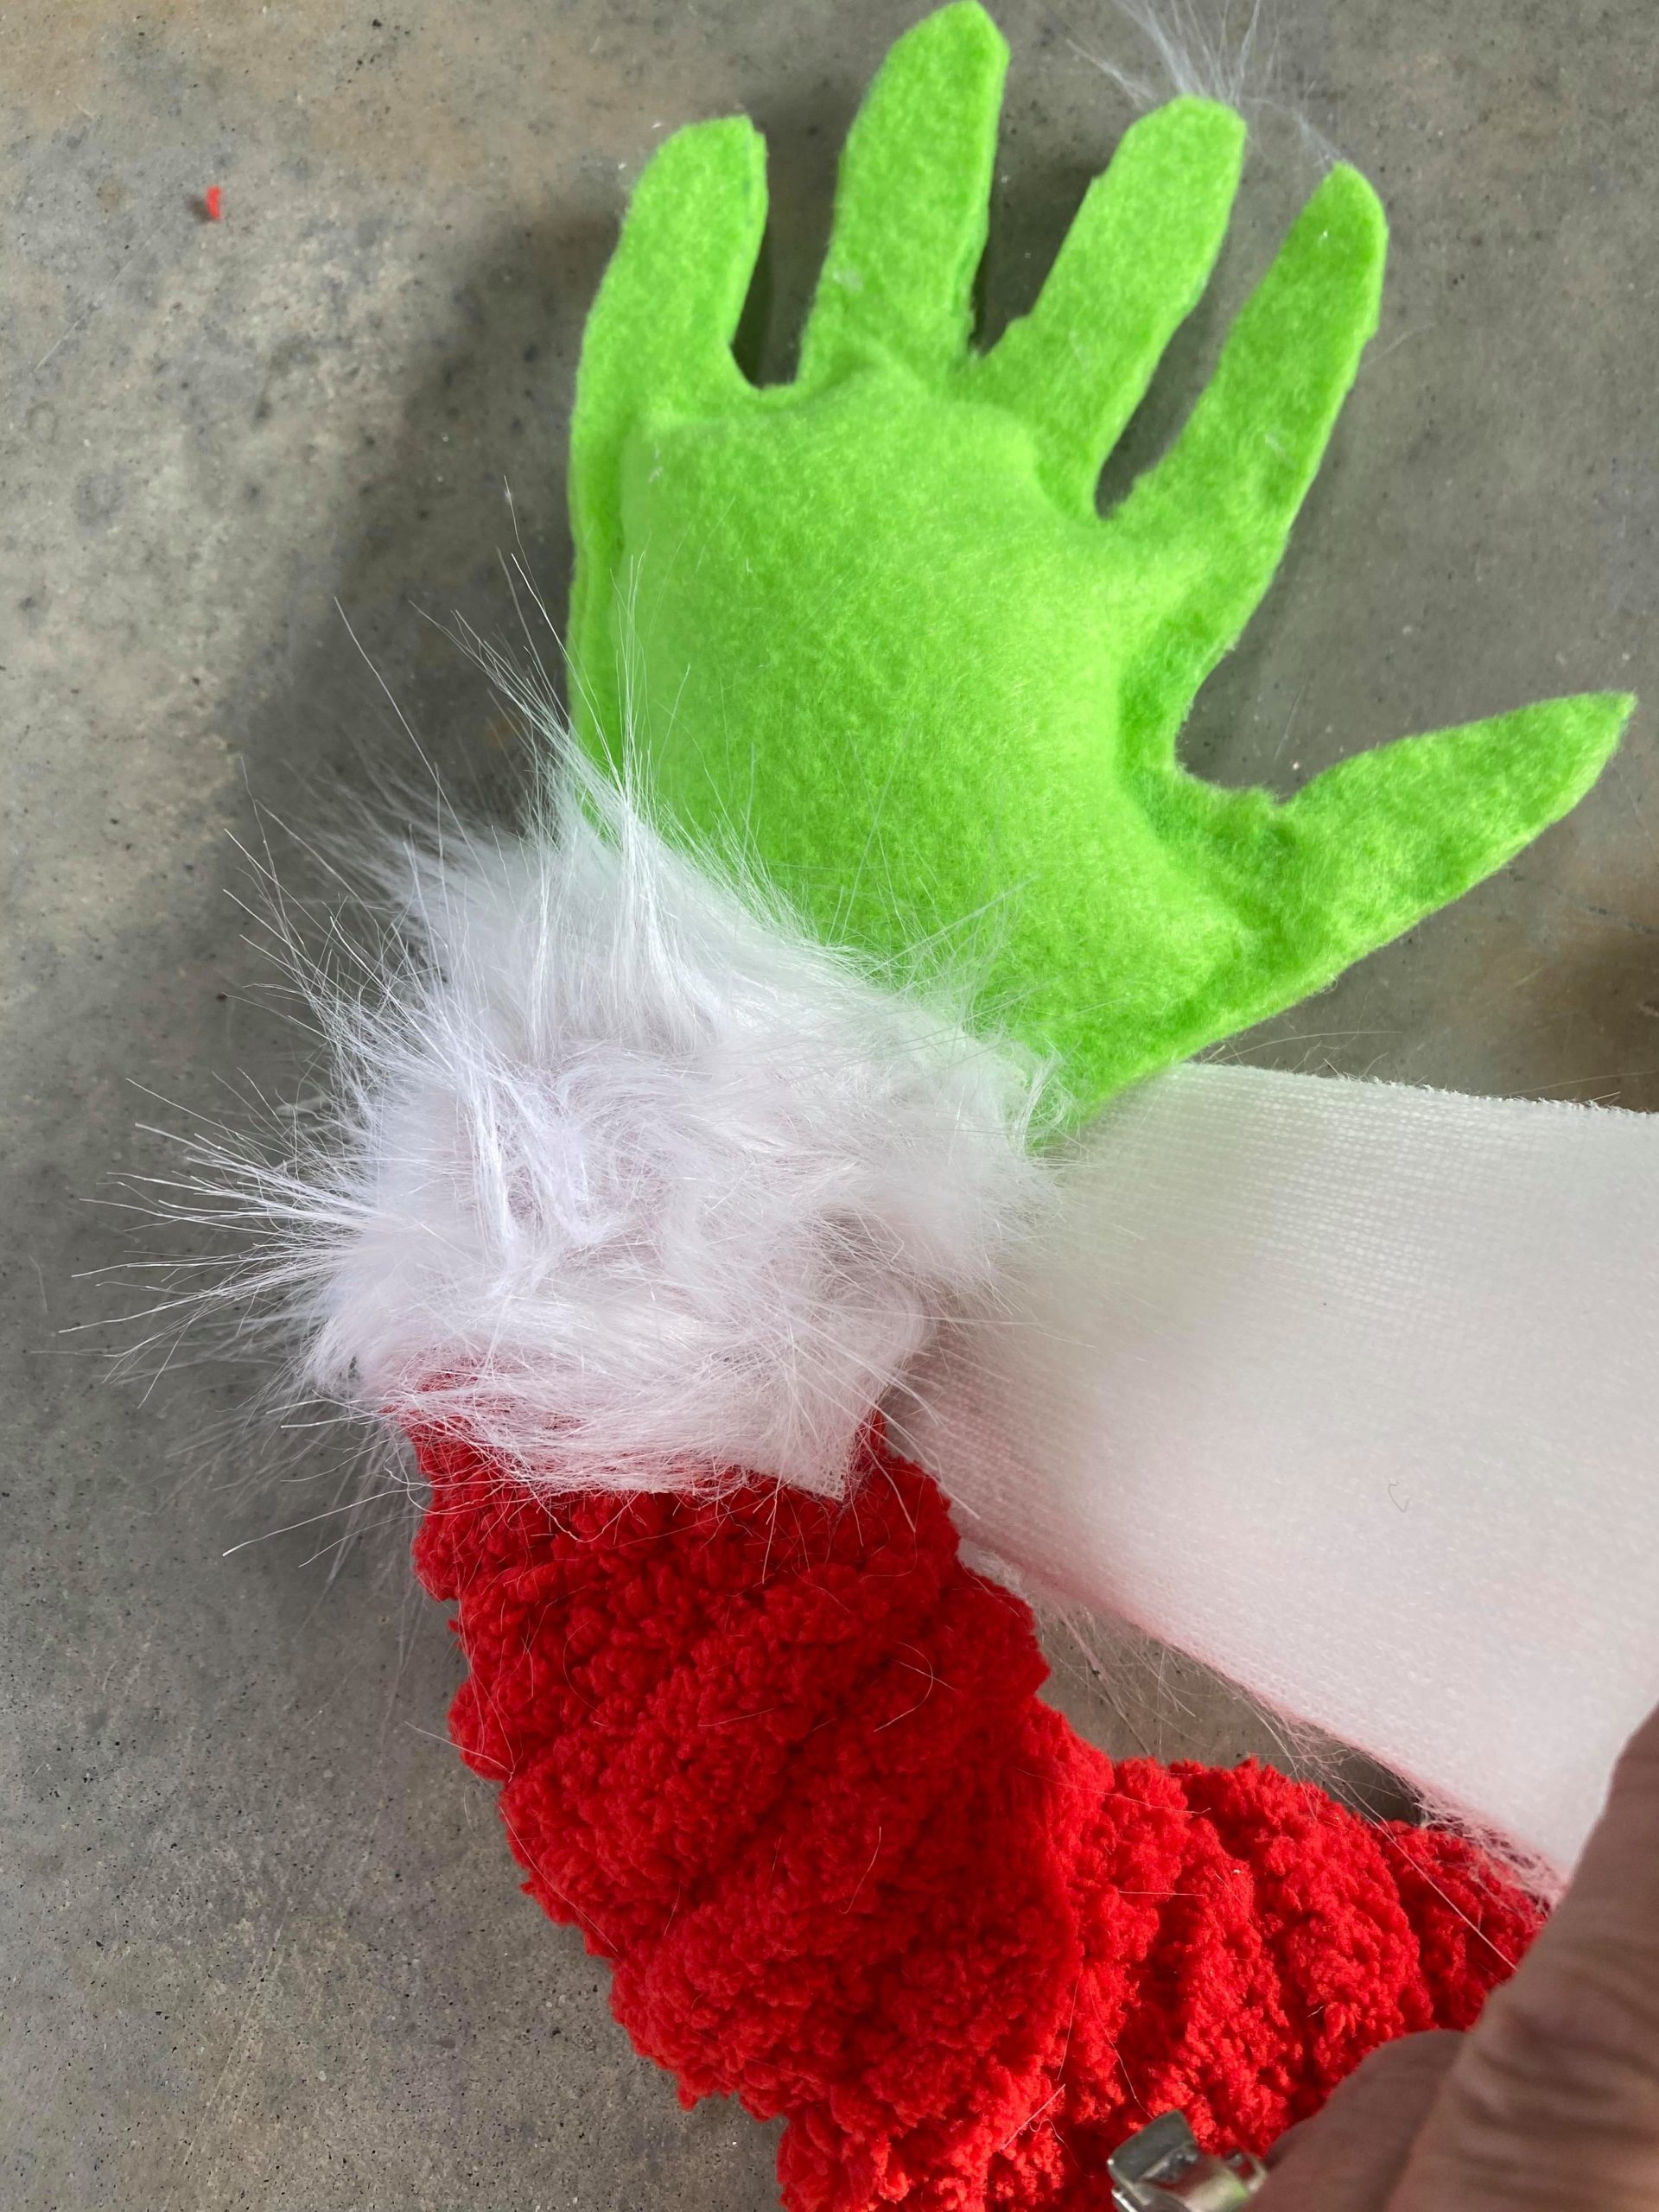 The Shabby Tree - Ok I asked you earlier what you thought I was making with  the green felt and red chunky yarn. Yes it has to do with the Grinch. I